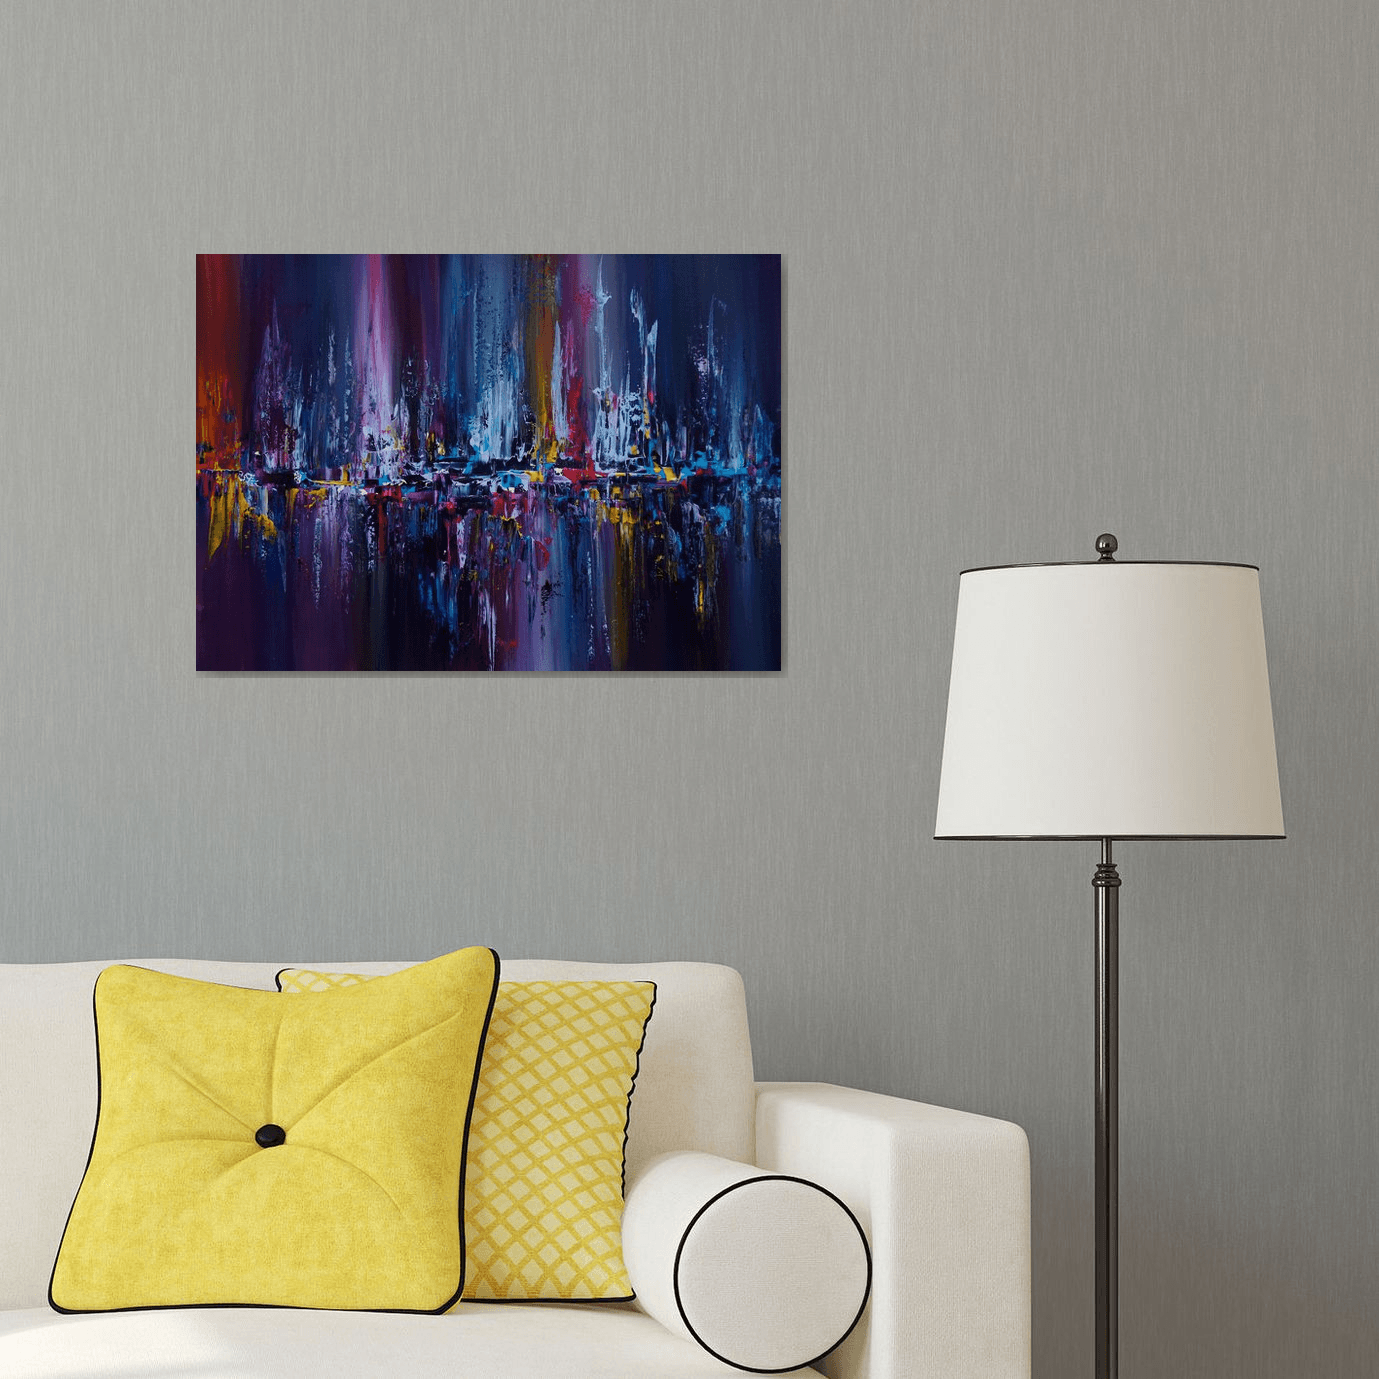 Neon Hill Town Original Acrylic Painting on Canvas 18x24 Abstract